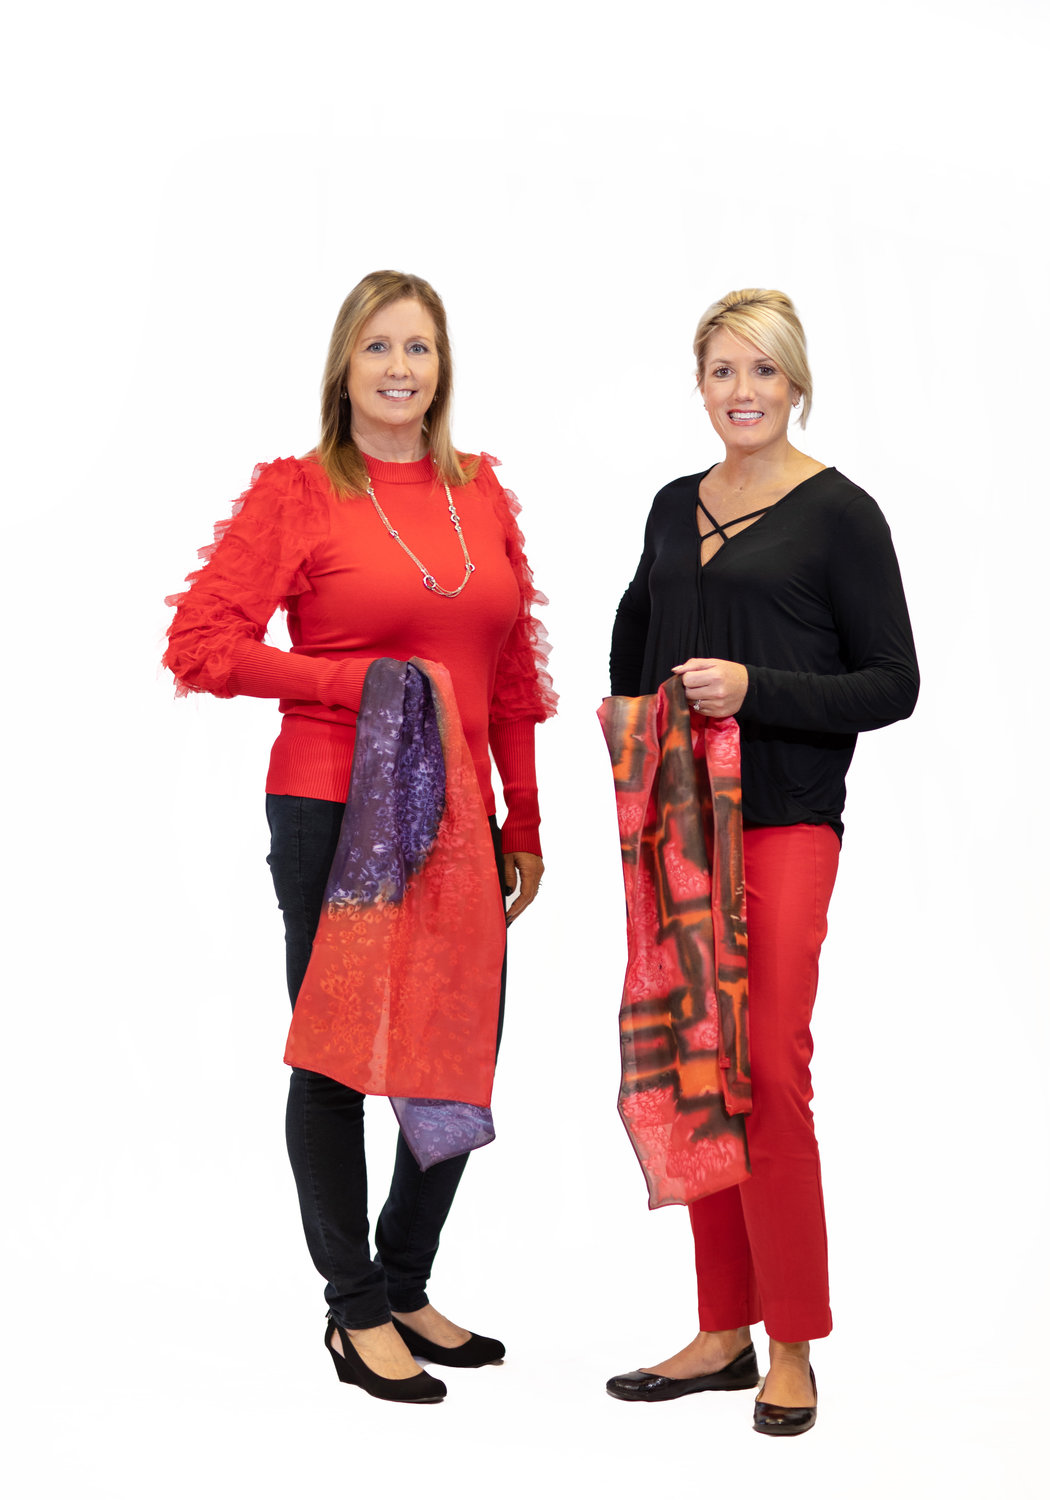 Wear Red for Women committee members model silk scarves custom-made by State Fair Community College art students that will be available to bid on at the Bothwell Foundation’s annual luncheon event.